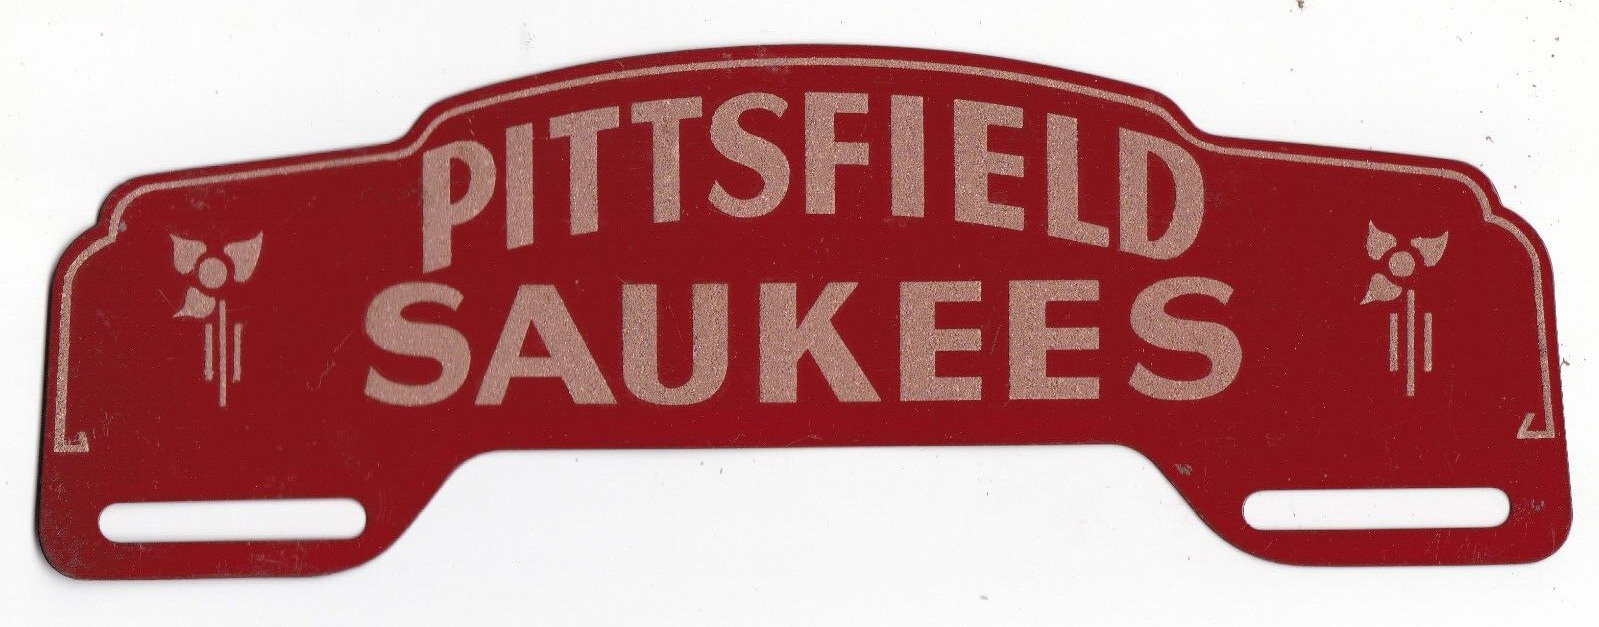 vintage license plate topper / Pittsfield Saukees / Illinois high school sports